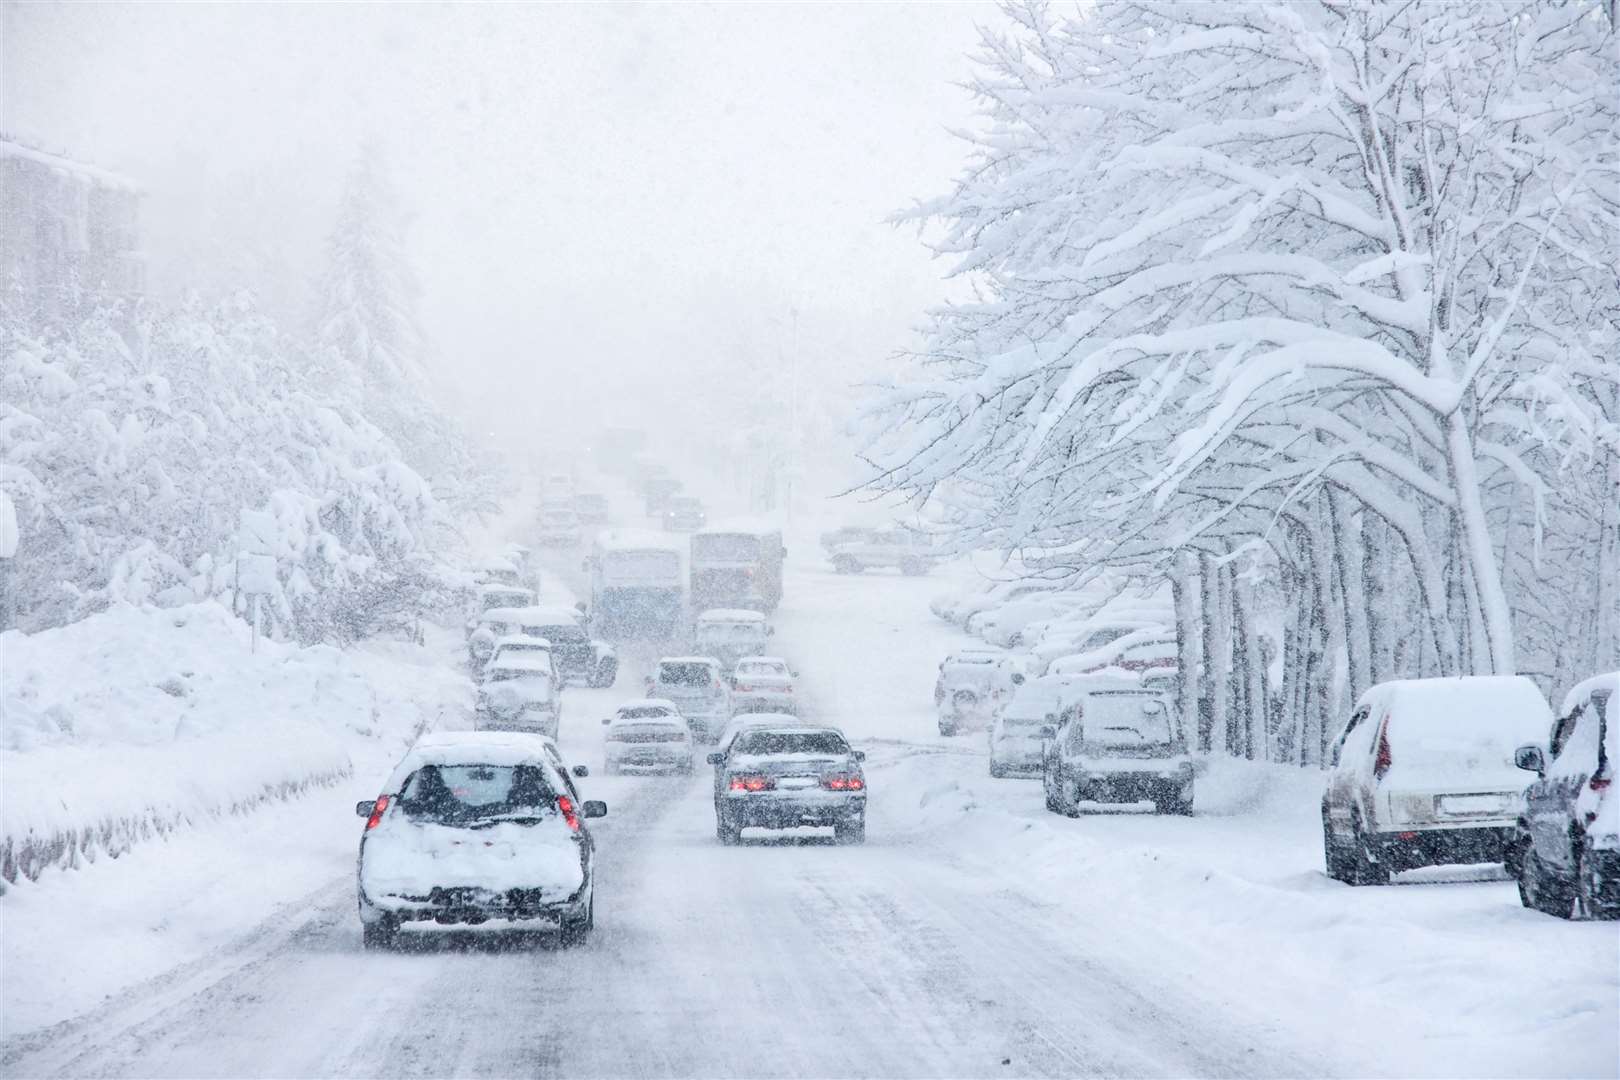 Drivers have been urged to give themselves extra time during bad weather (GEM Motoring Assist/AP)